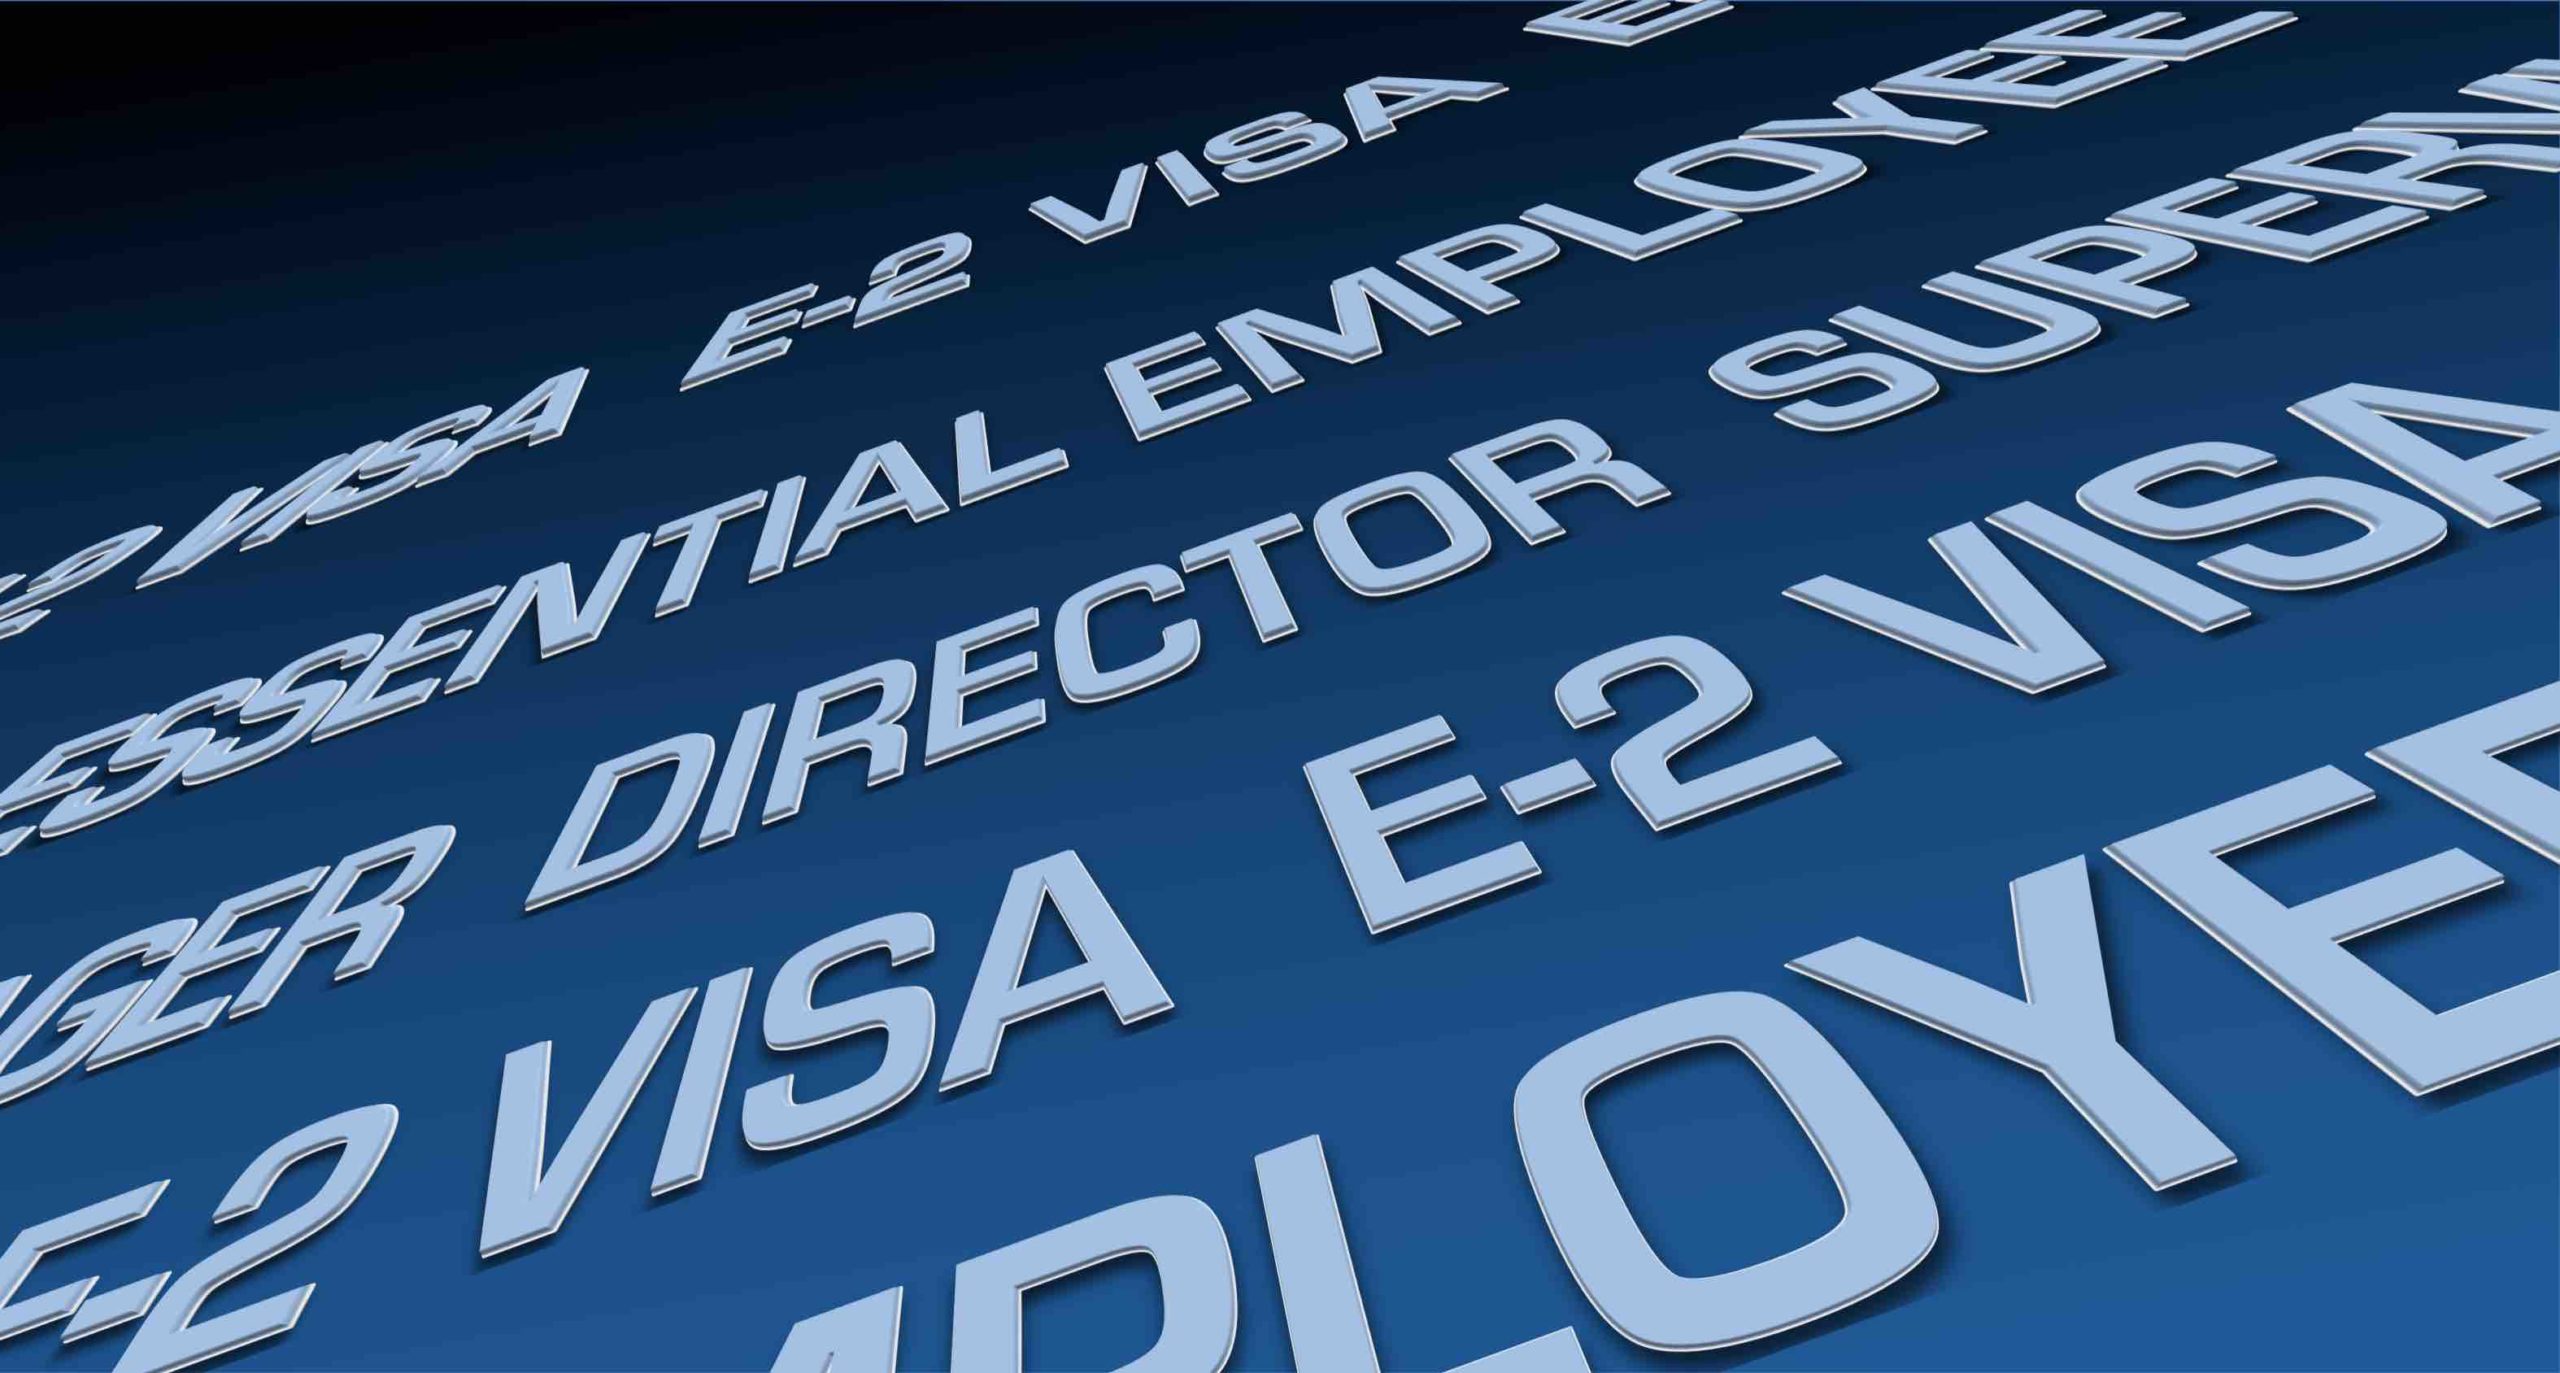 3 Clever Uses of E2 Visas for Employees [Infographic]